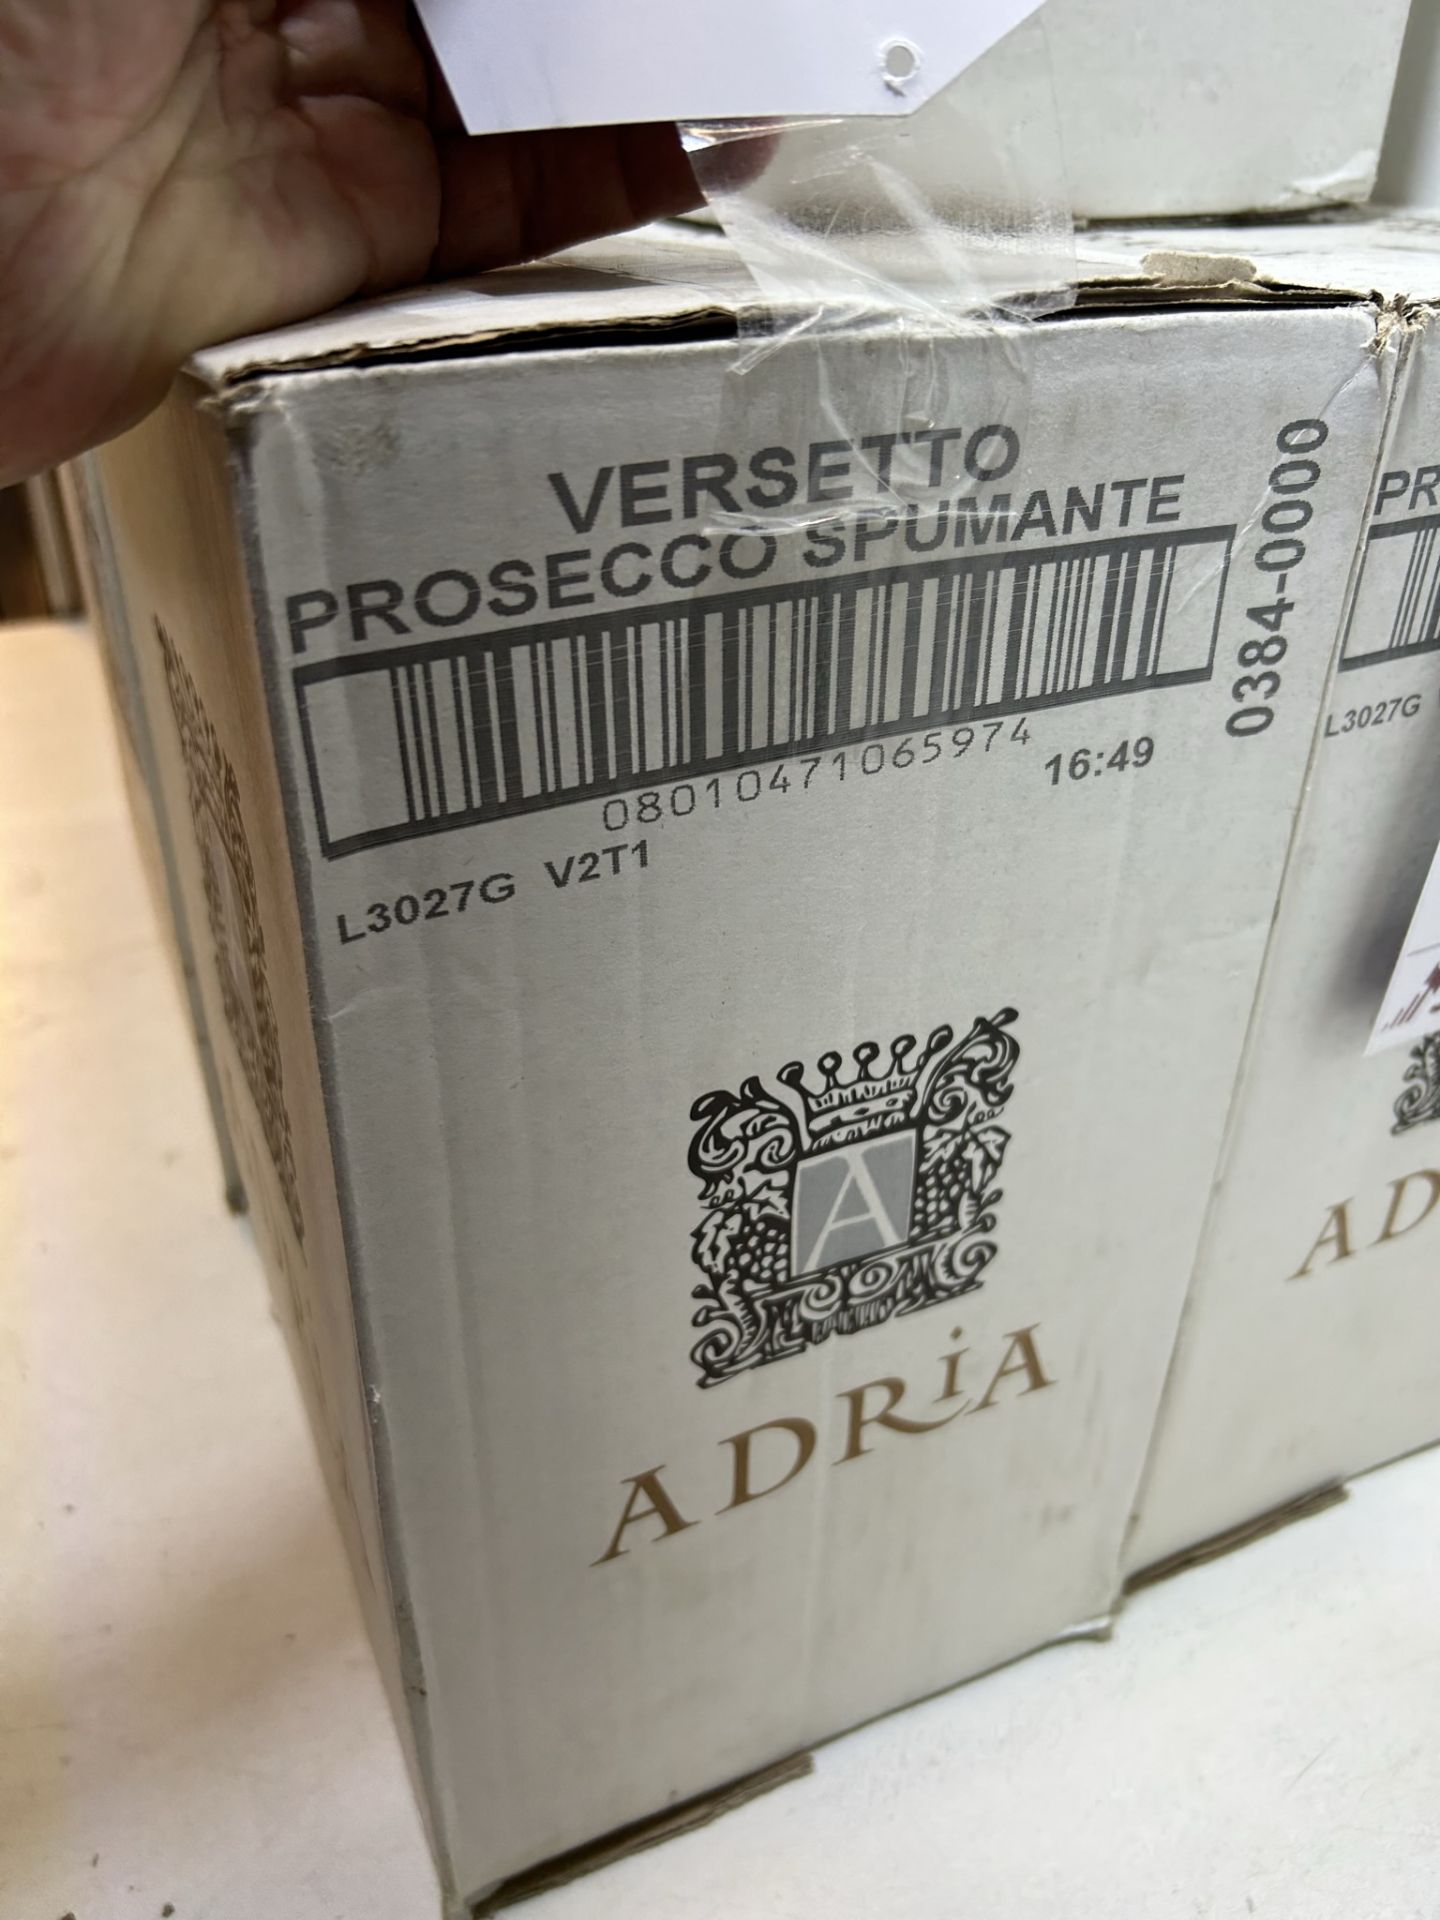 6 x Crates of Adria Versetto/Fontessa Spumante Prosecco & 12 x Loose Bottles (48 x Bottles in Total) - Image 3 of 7